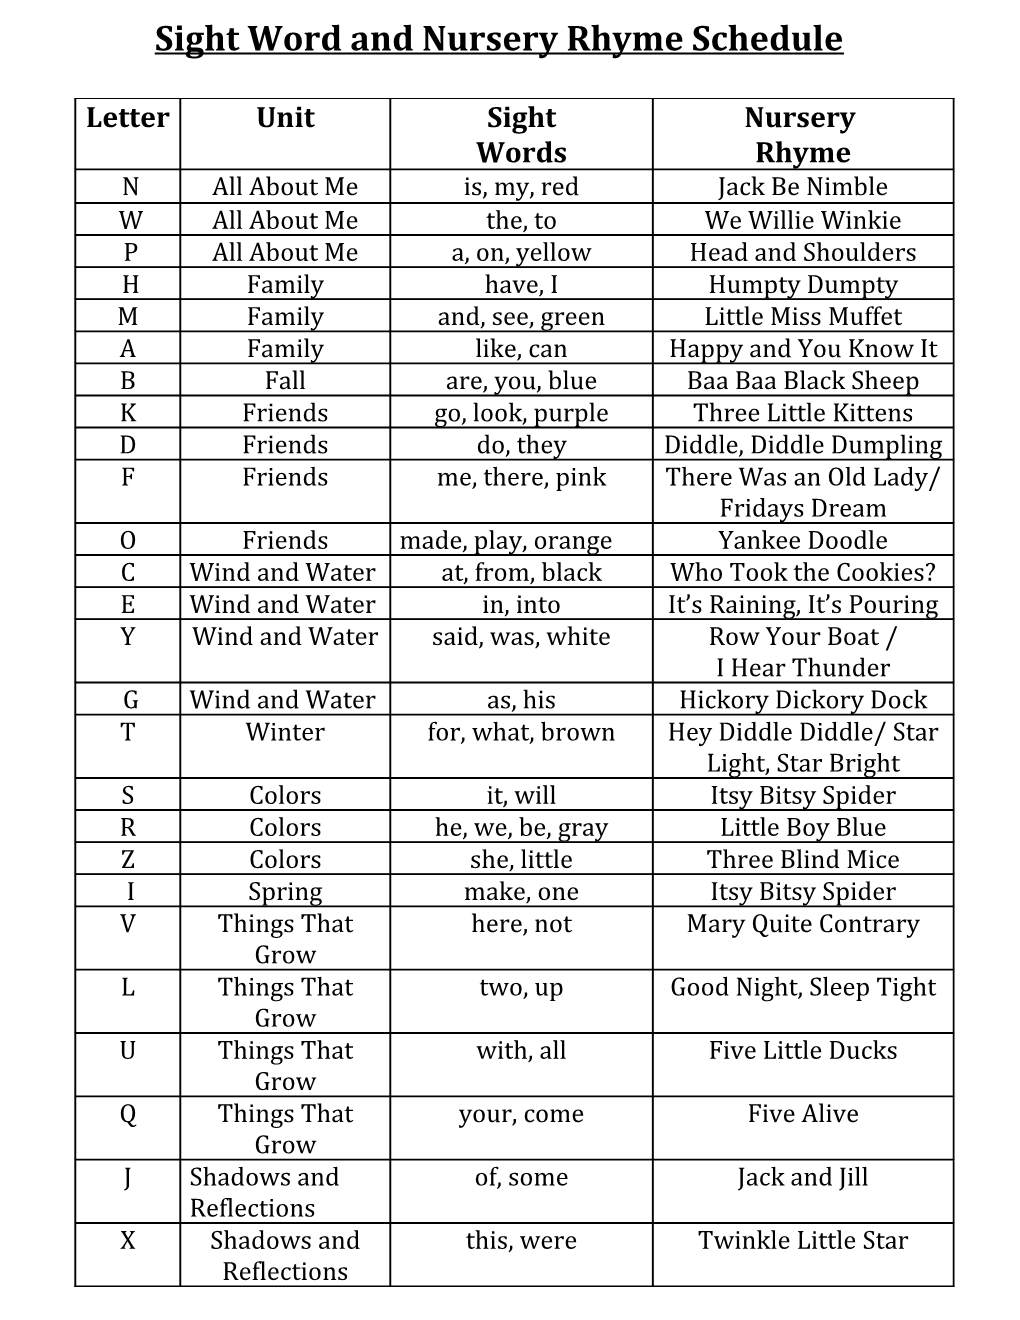 Sight Word and Nursery Rhyme Schedule